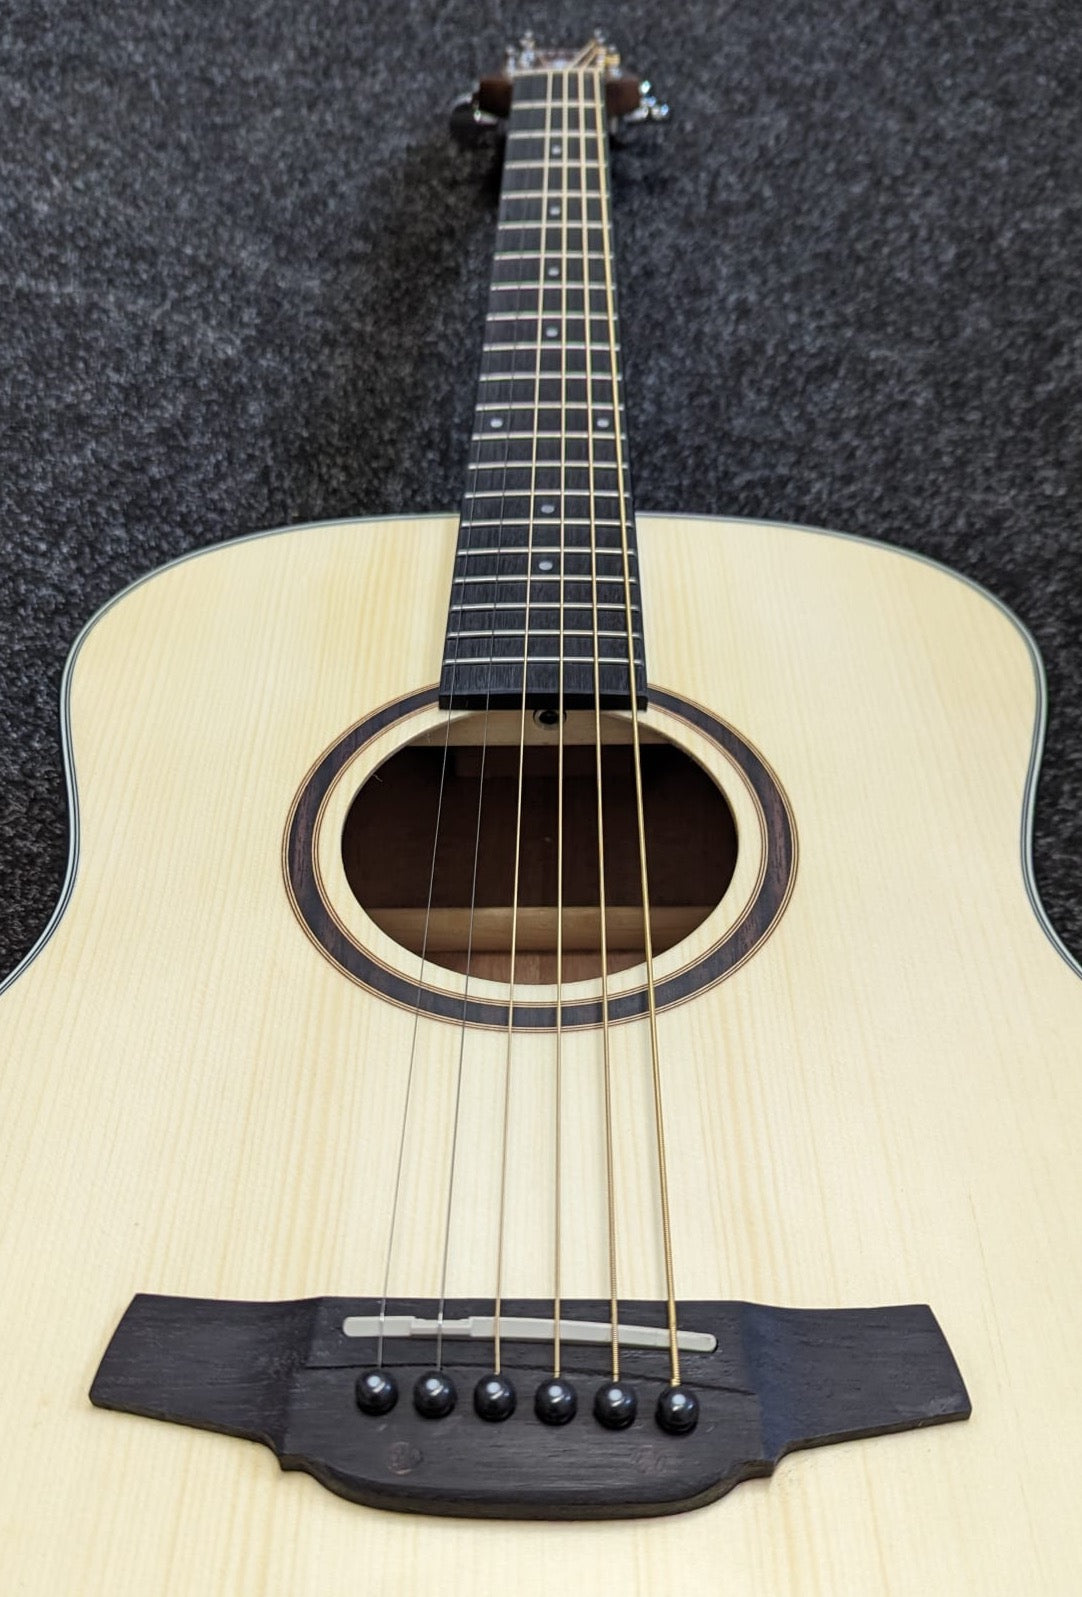 Crafter HT-100 Orchestra Acoustic Guitar in Natural Left Handed